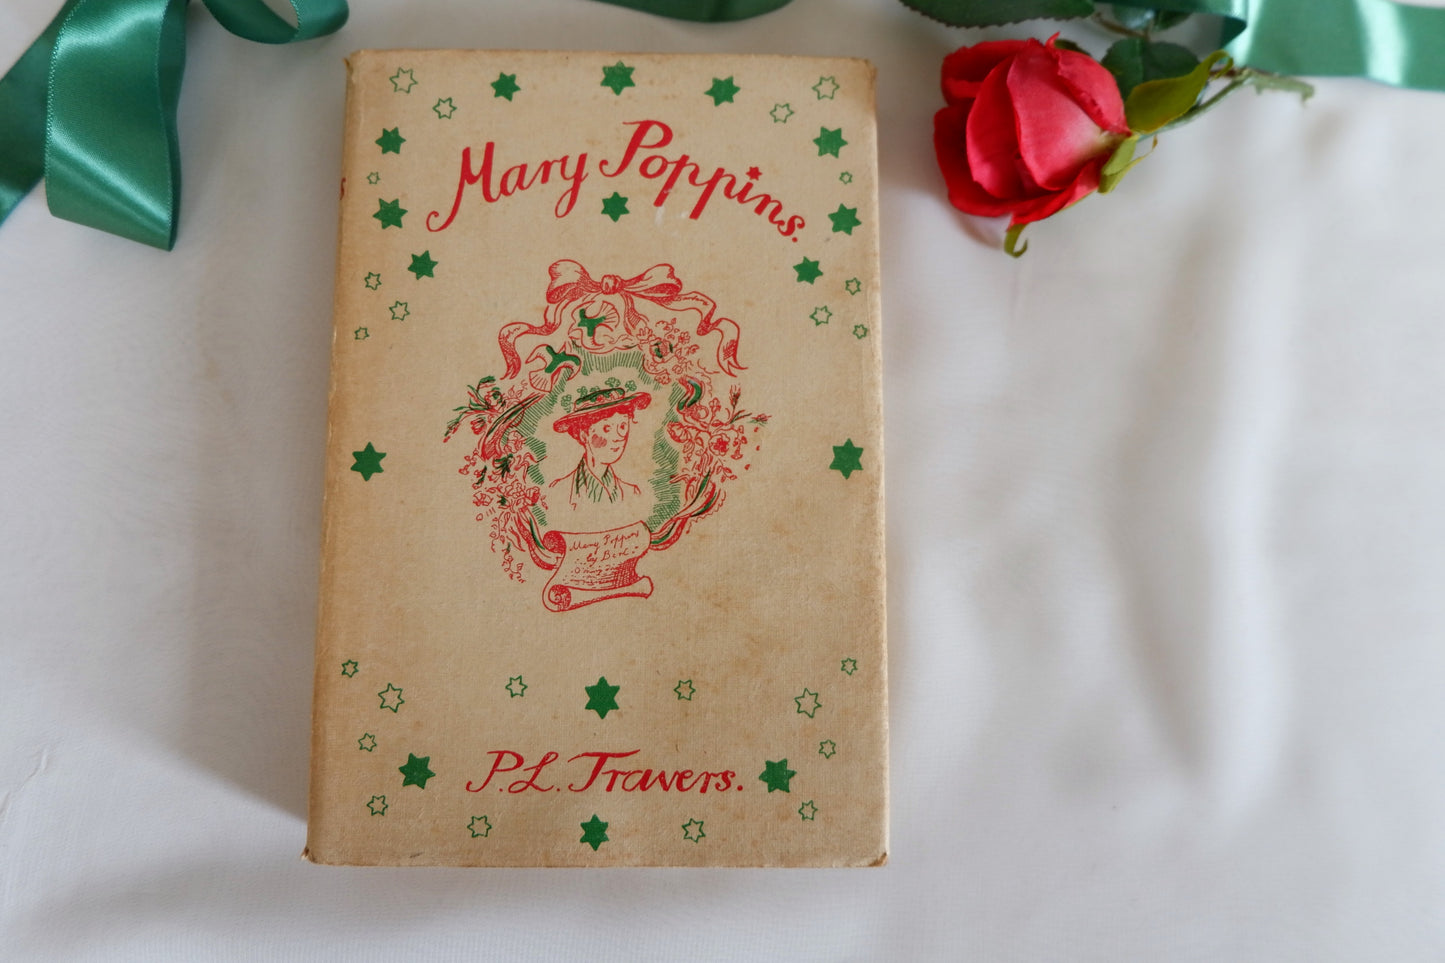 1948 Mary Poppins by PL Travers / Peter Davies, London / 12th Printing in Good Condition / With Original Dust Wrapper / Extremely Scarce